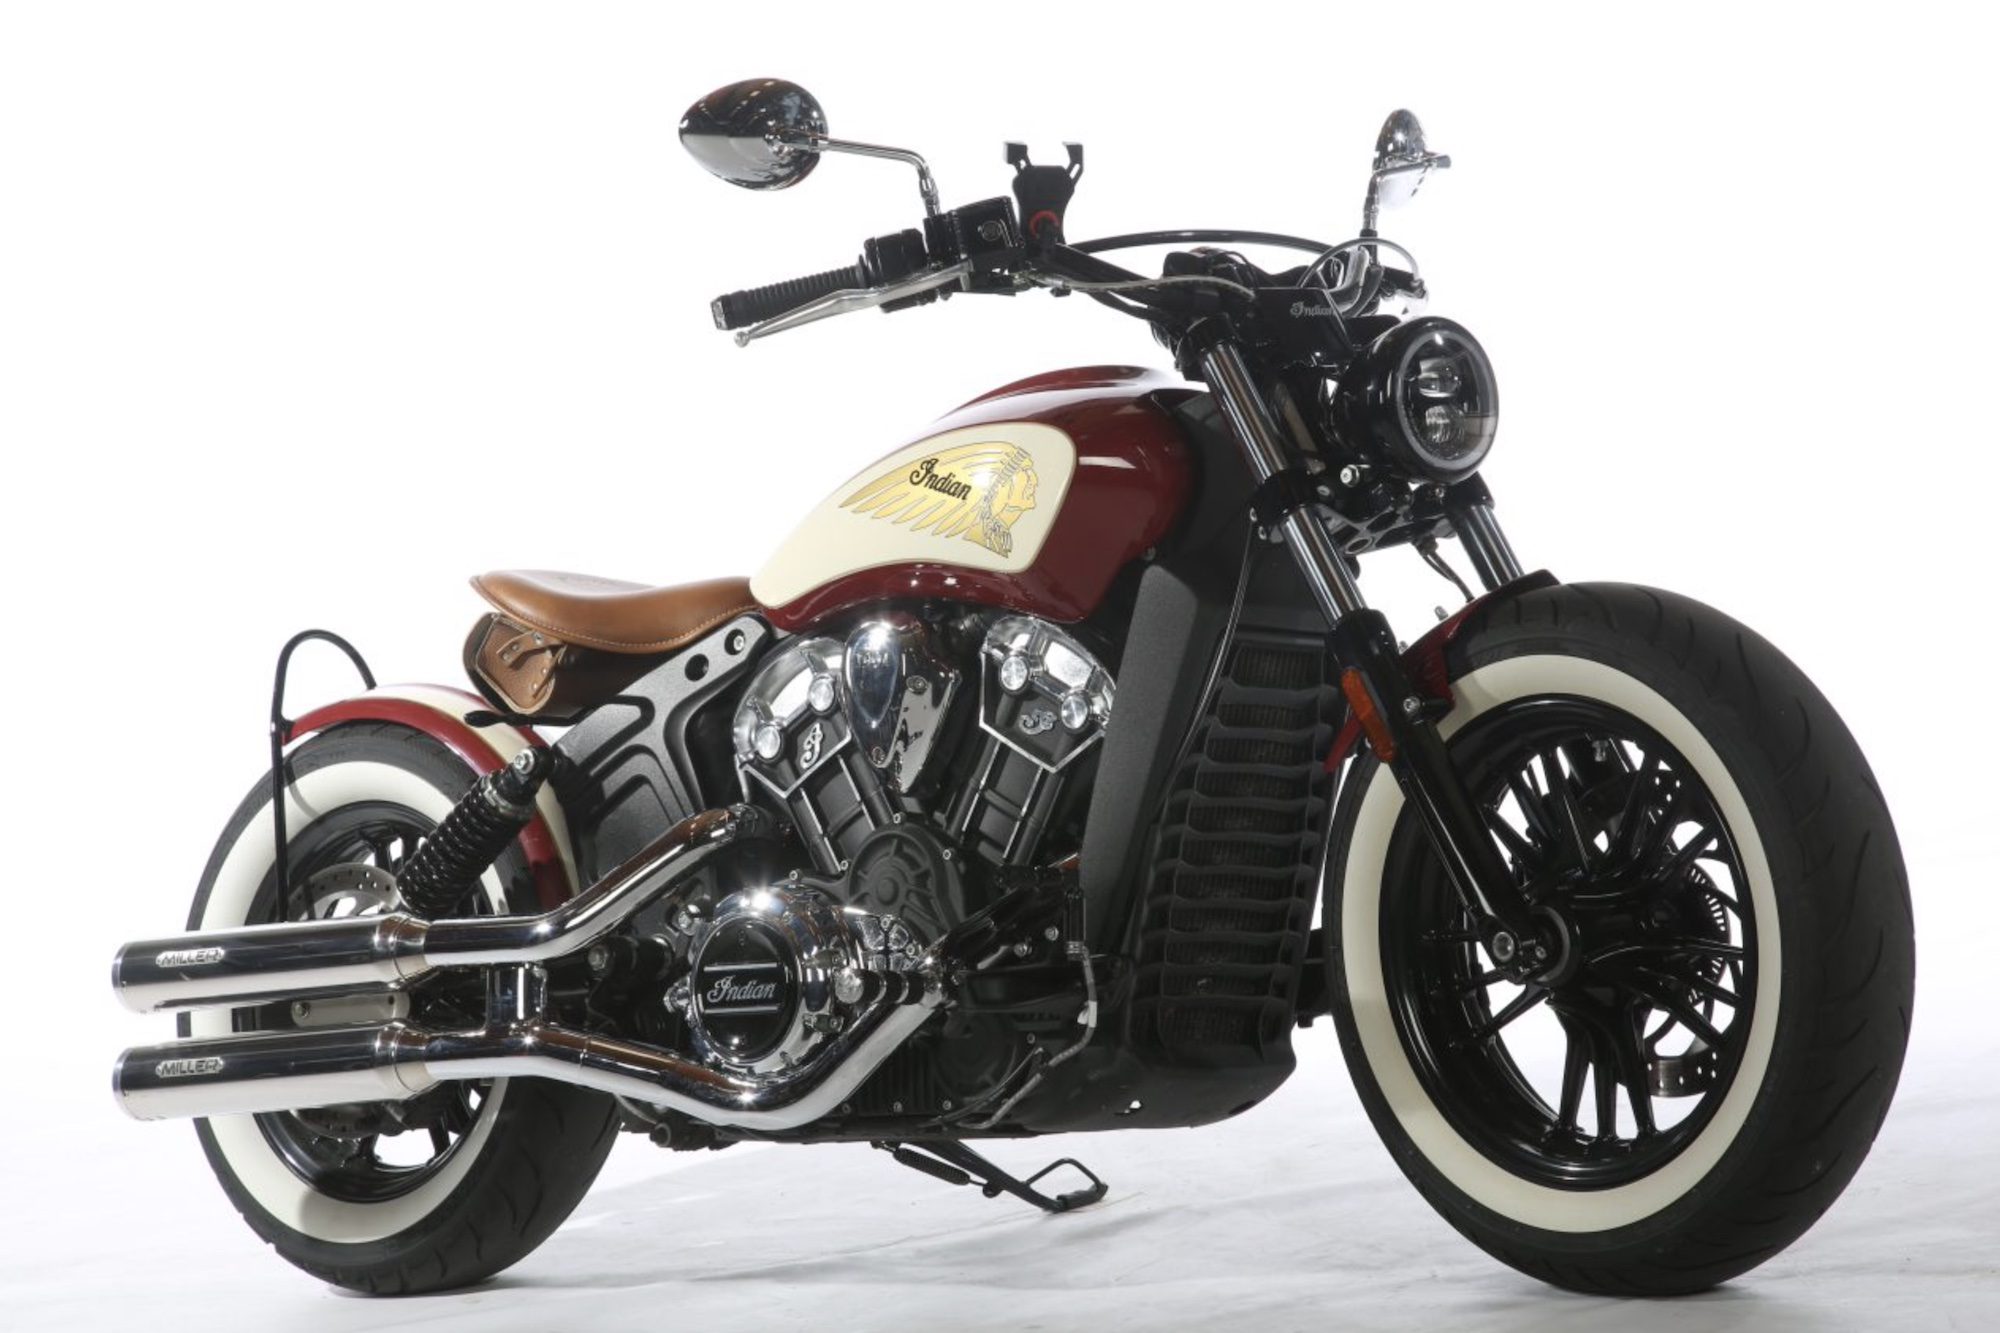 Indian Scout Winner - (#22) Thomas Grewe, Germany. Media sourced from Indian's press release.